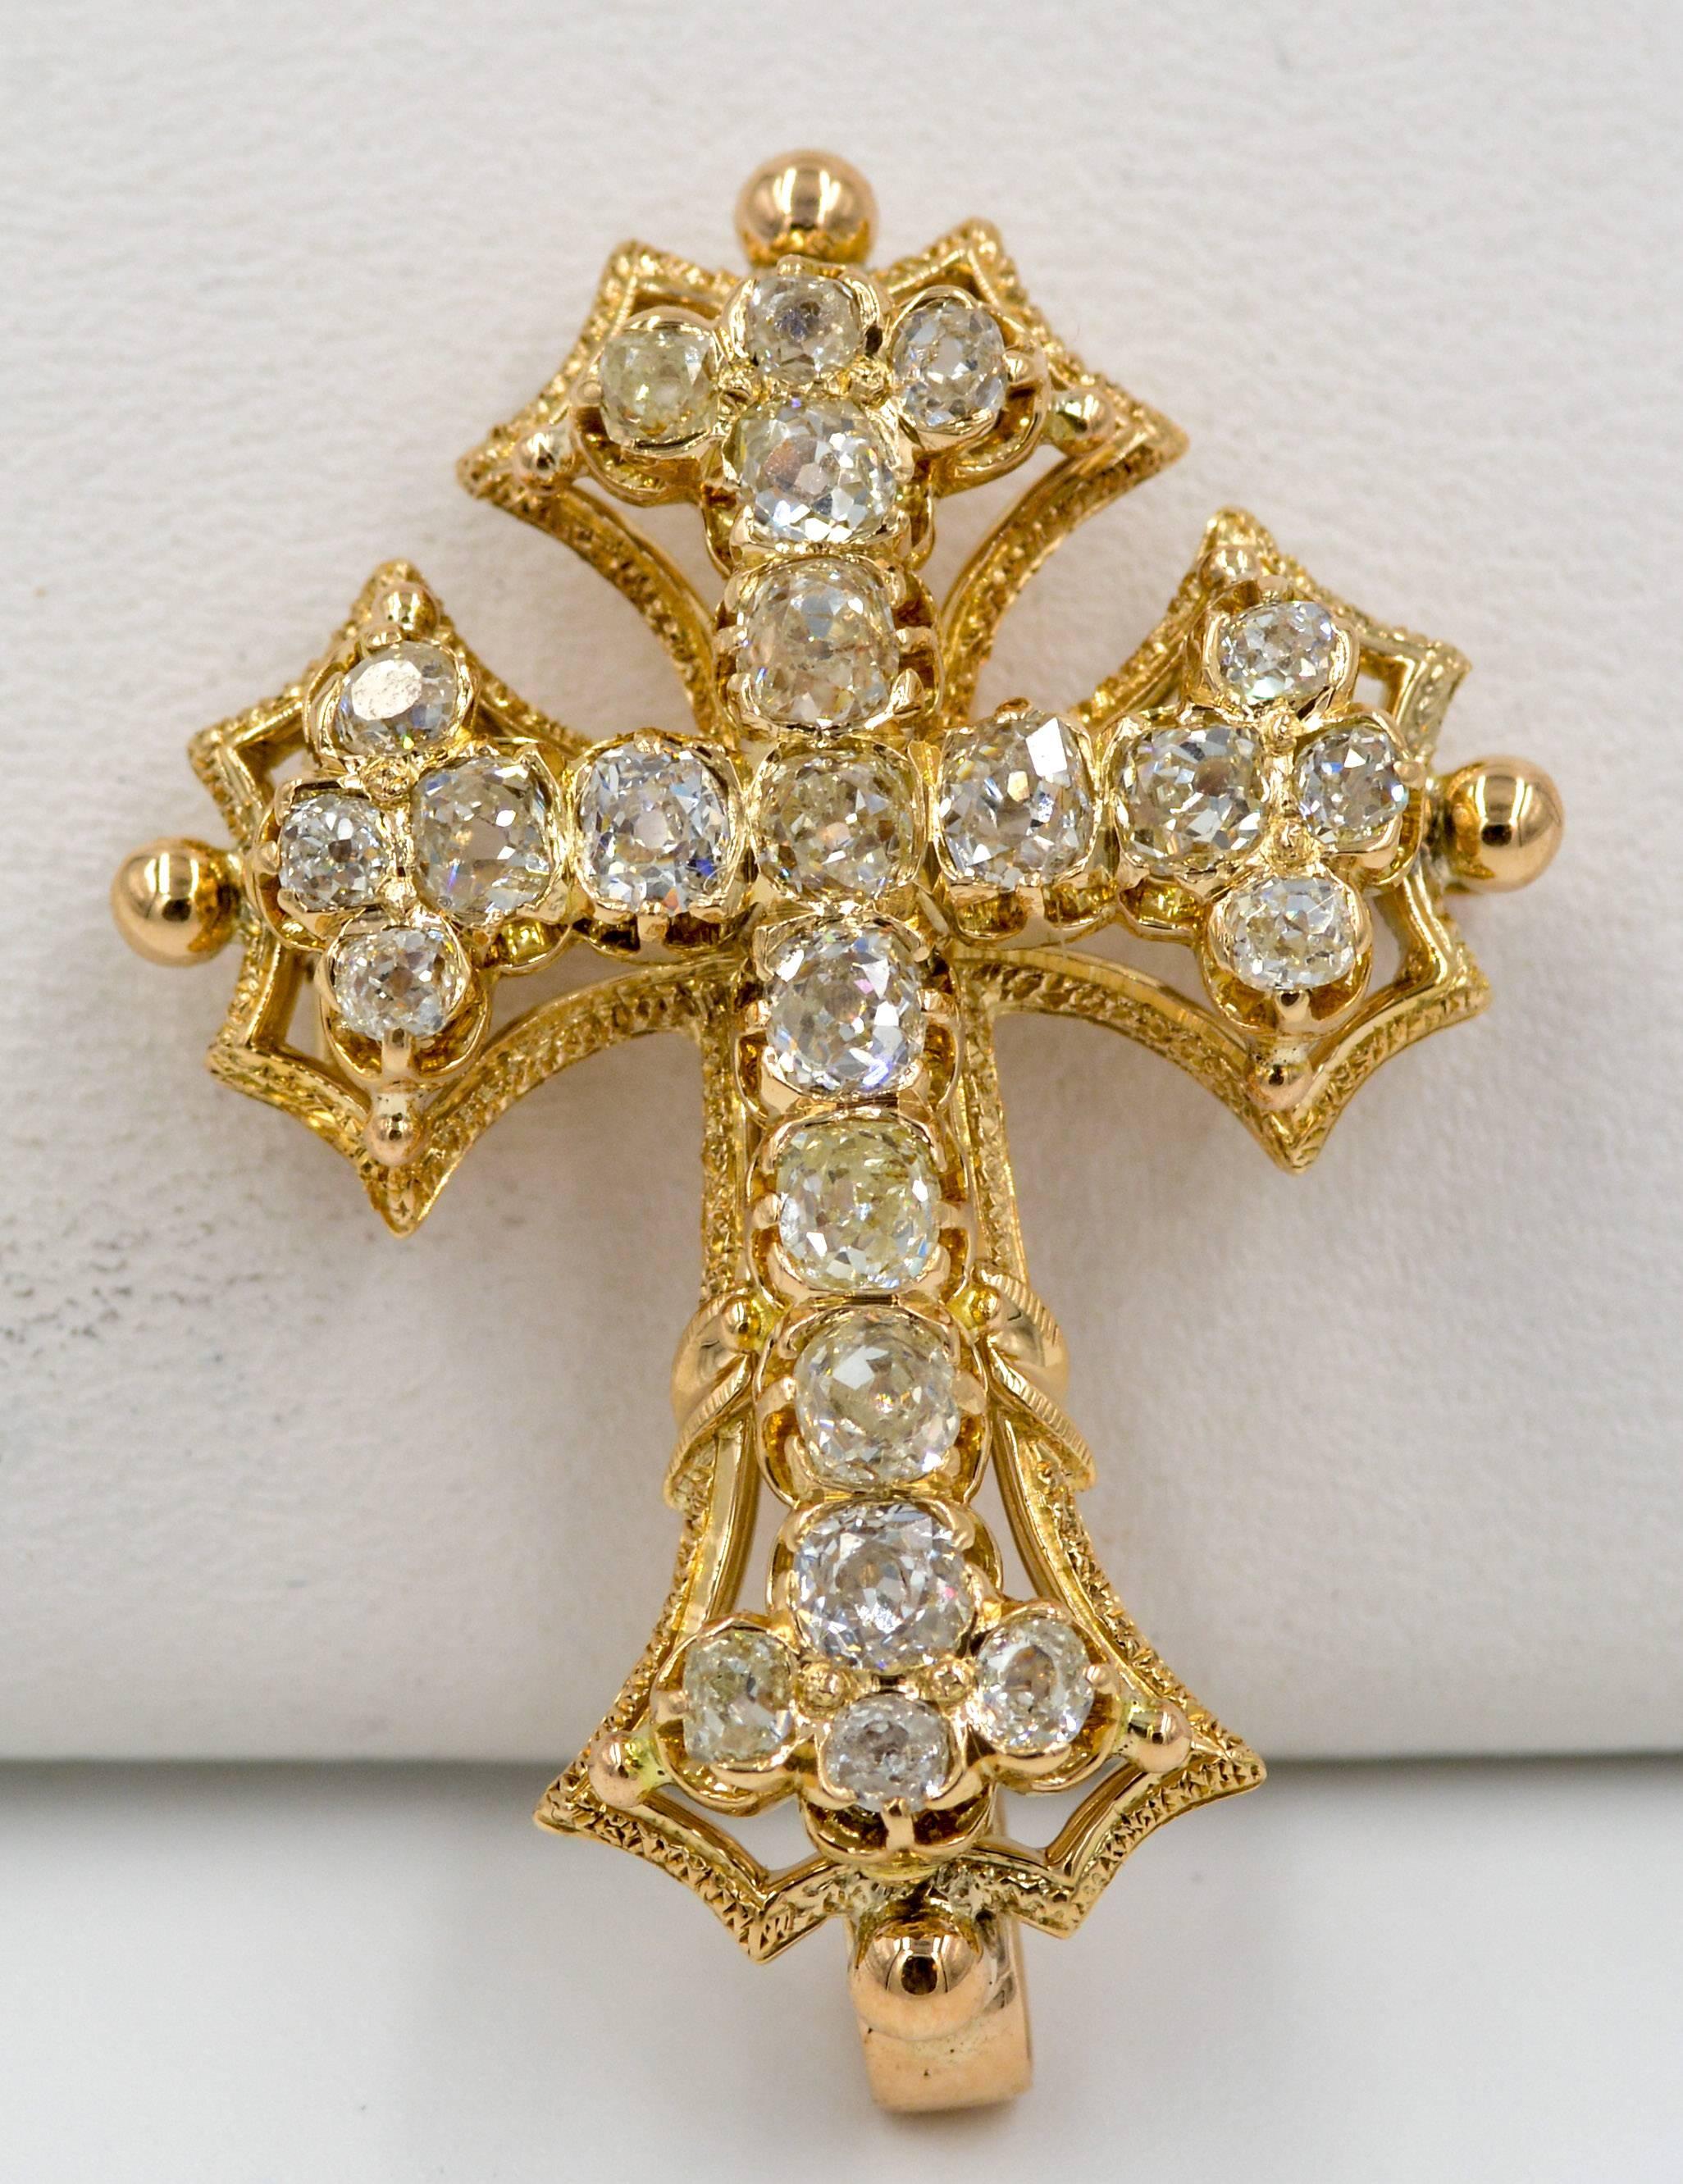 This classic Victorian era cross pendant/pin is an amazing example of 19th century craftsmanship and beauty.  The cross is made entirely of 18kt yellow gold and is set with twenty three old mine cut diamonds that show case the diamond cutting